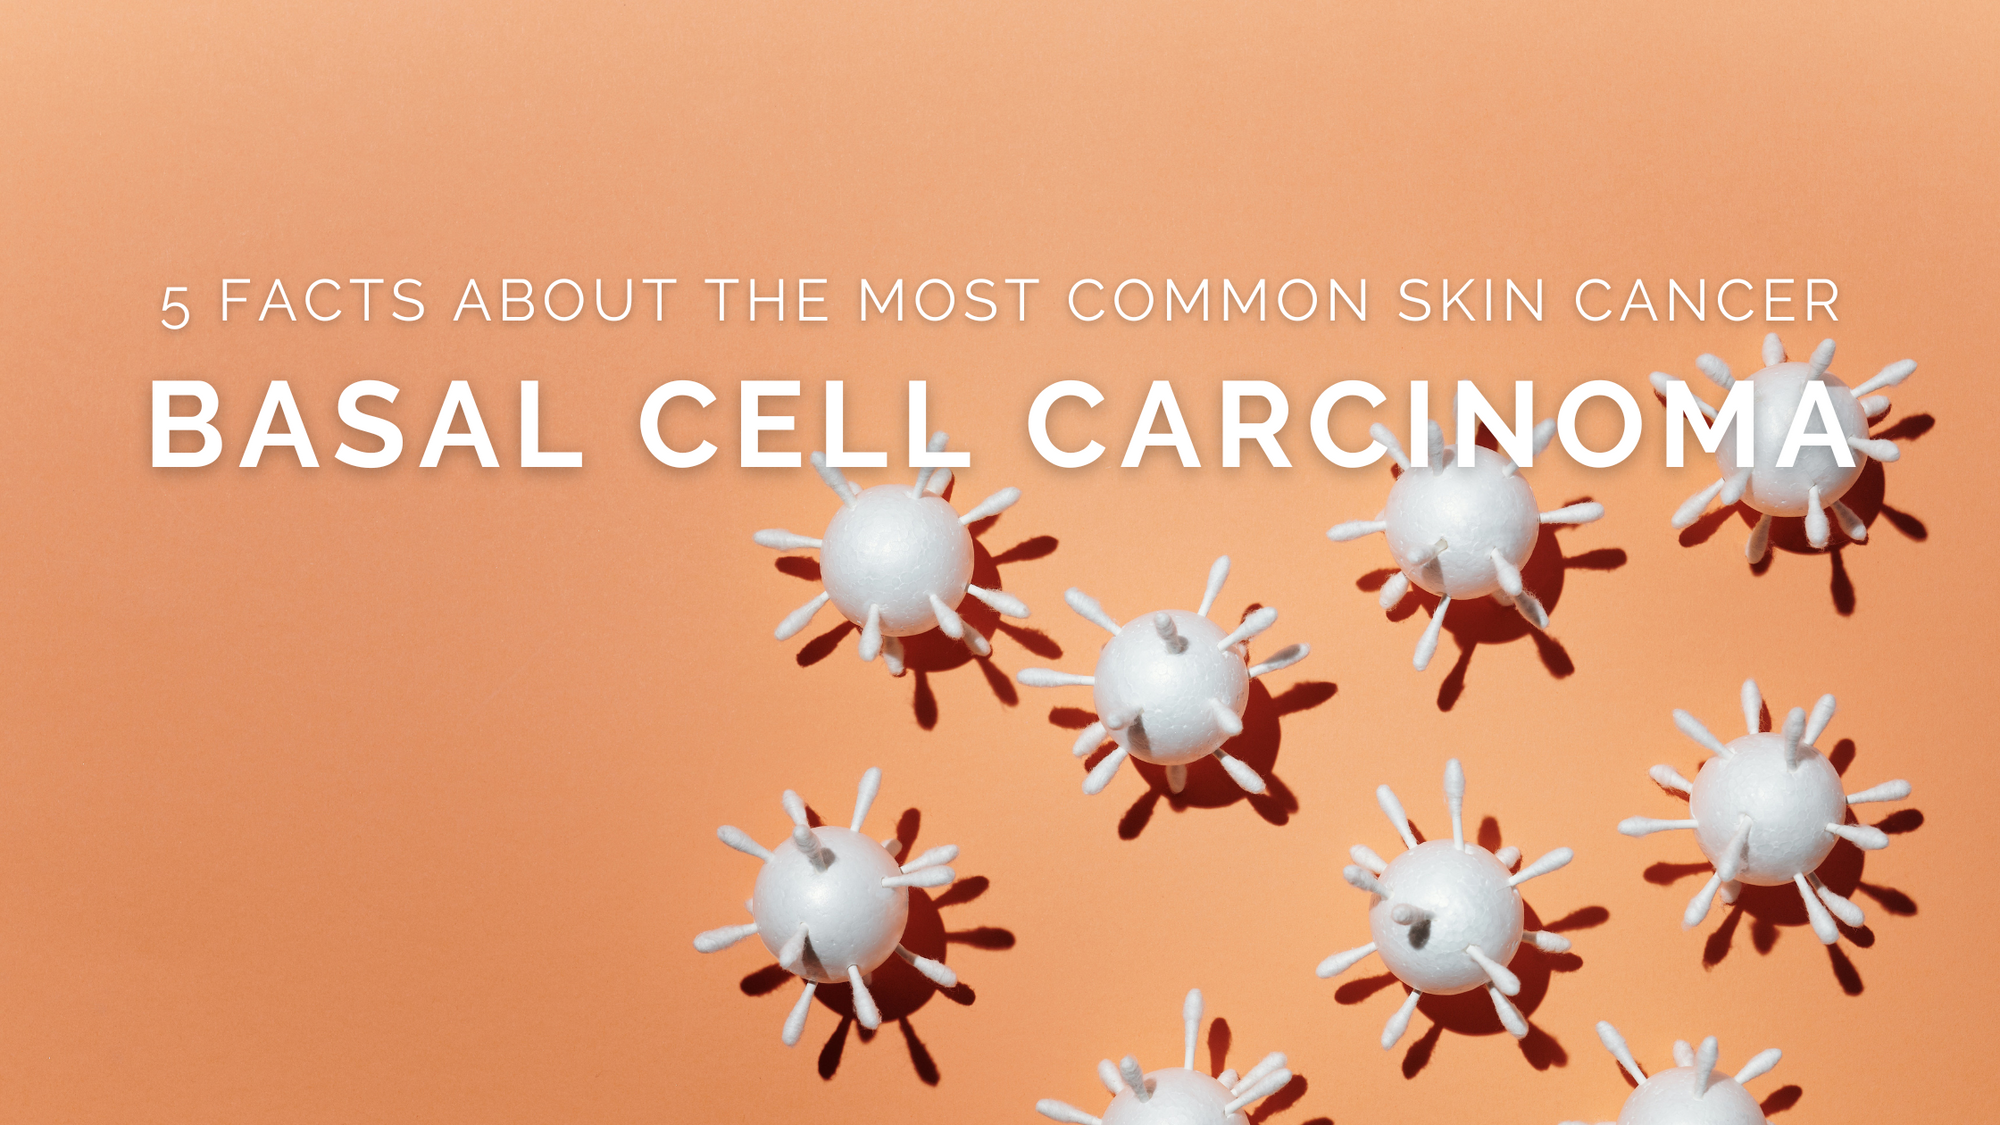 Facts about the most common skin cancer - Basal Cell Carcinoma